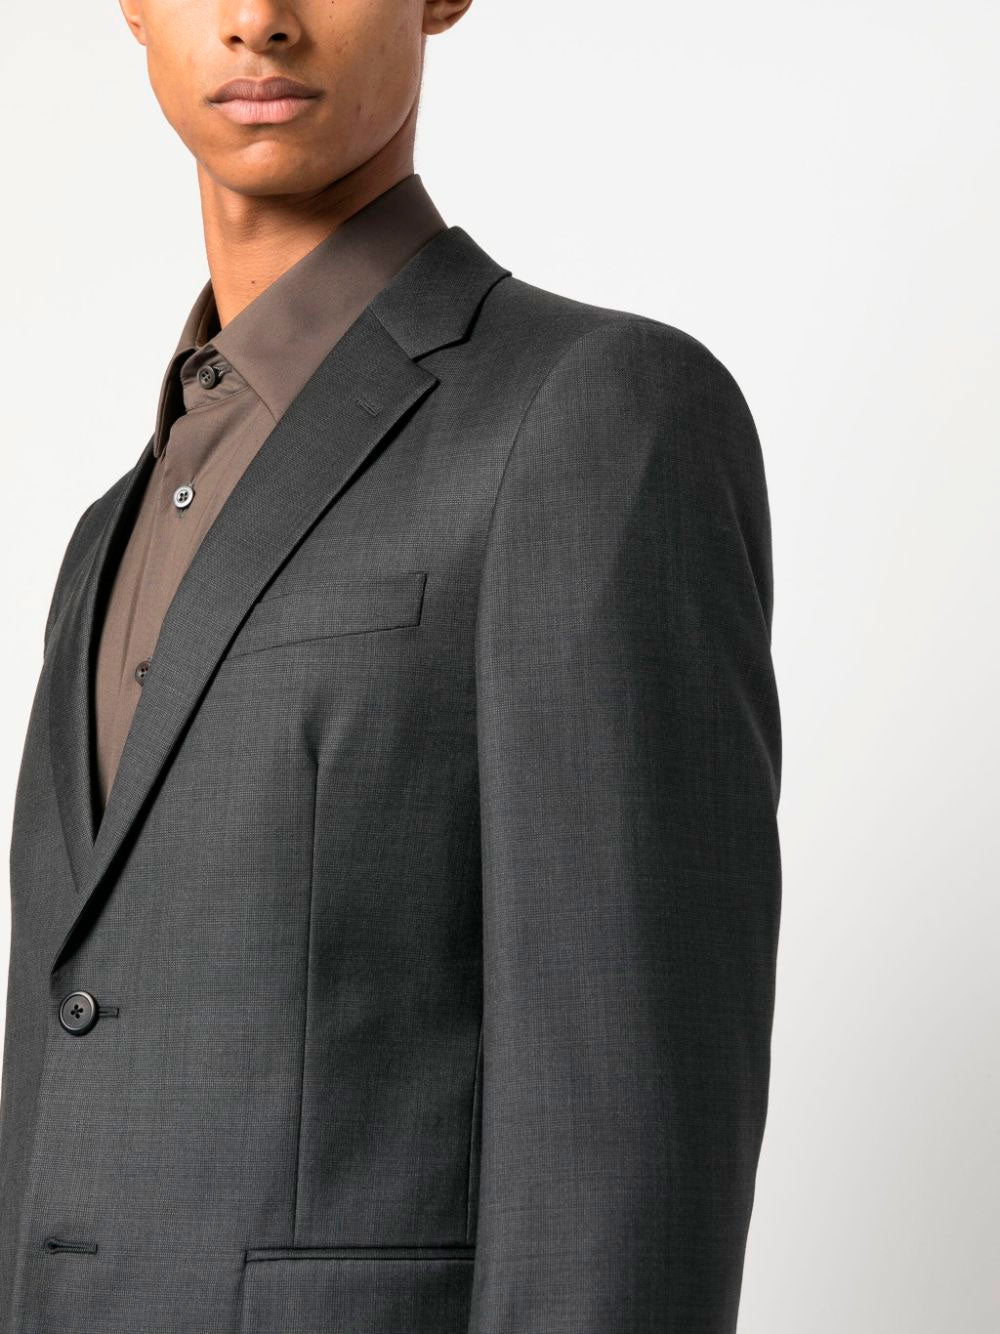 Single-breasted wool suit